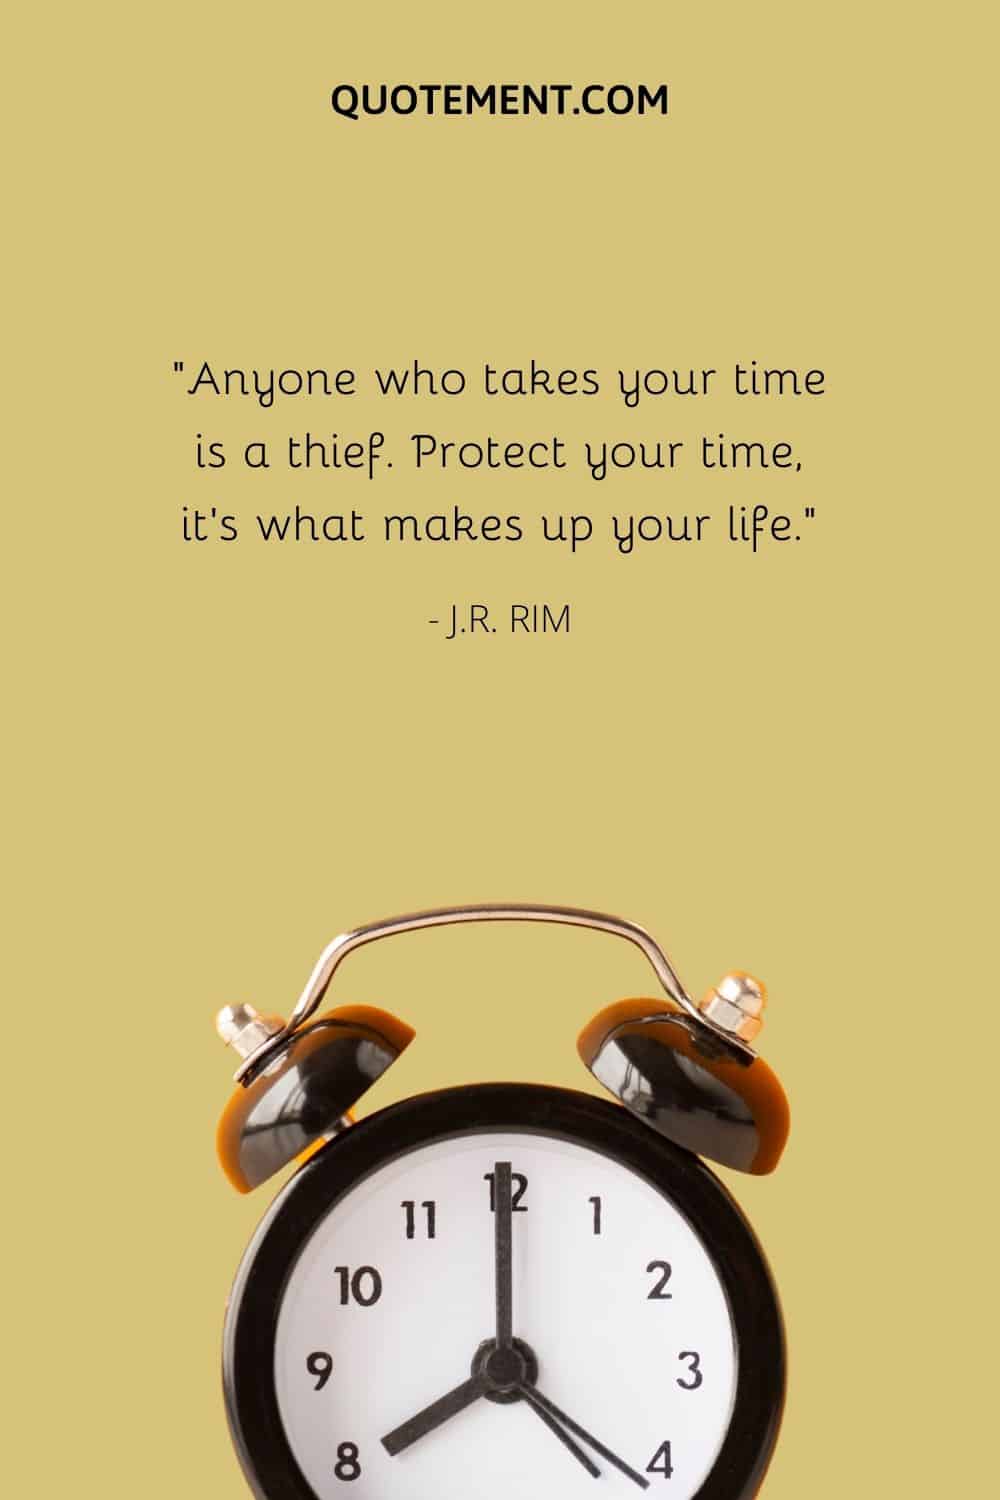 Anyone who takes your time is a thief. Protect your time, it's what makes up your life.